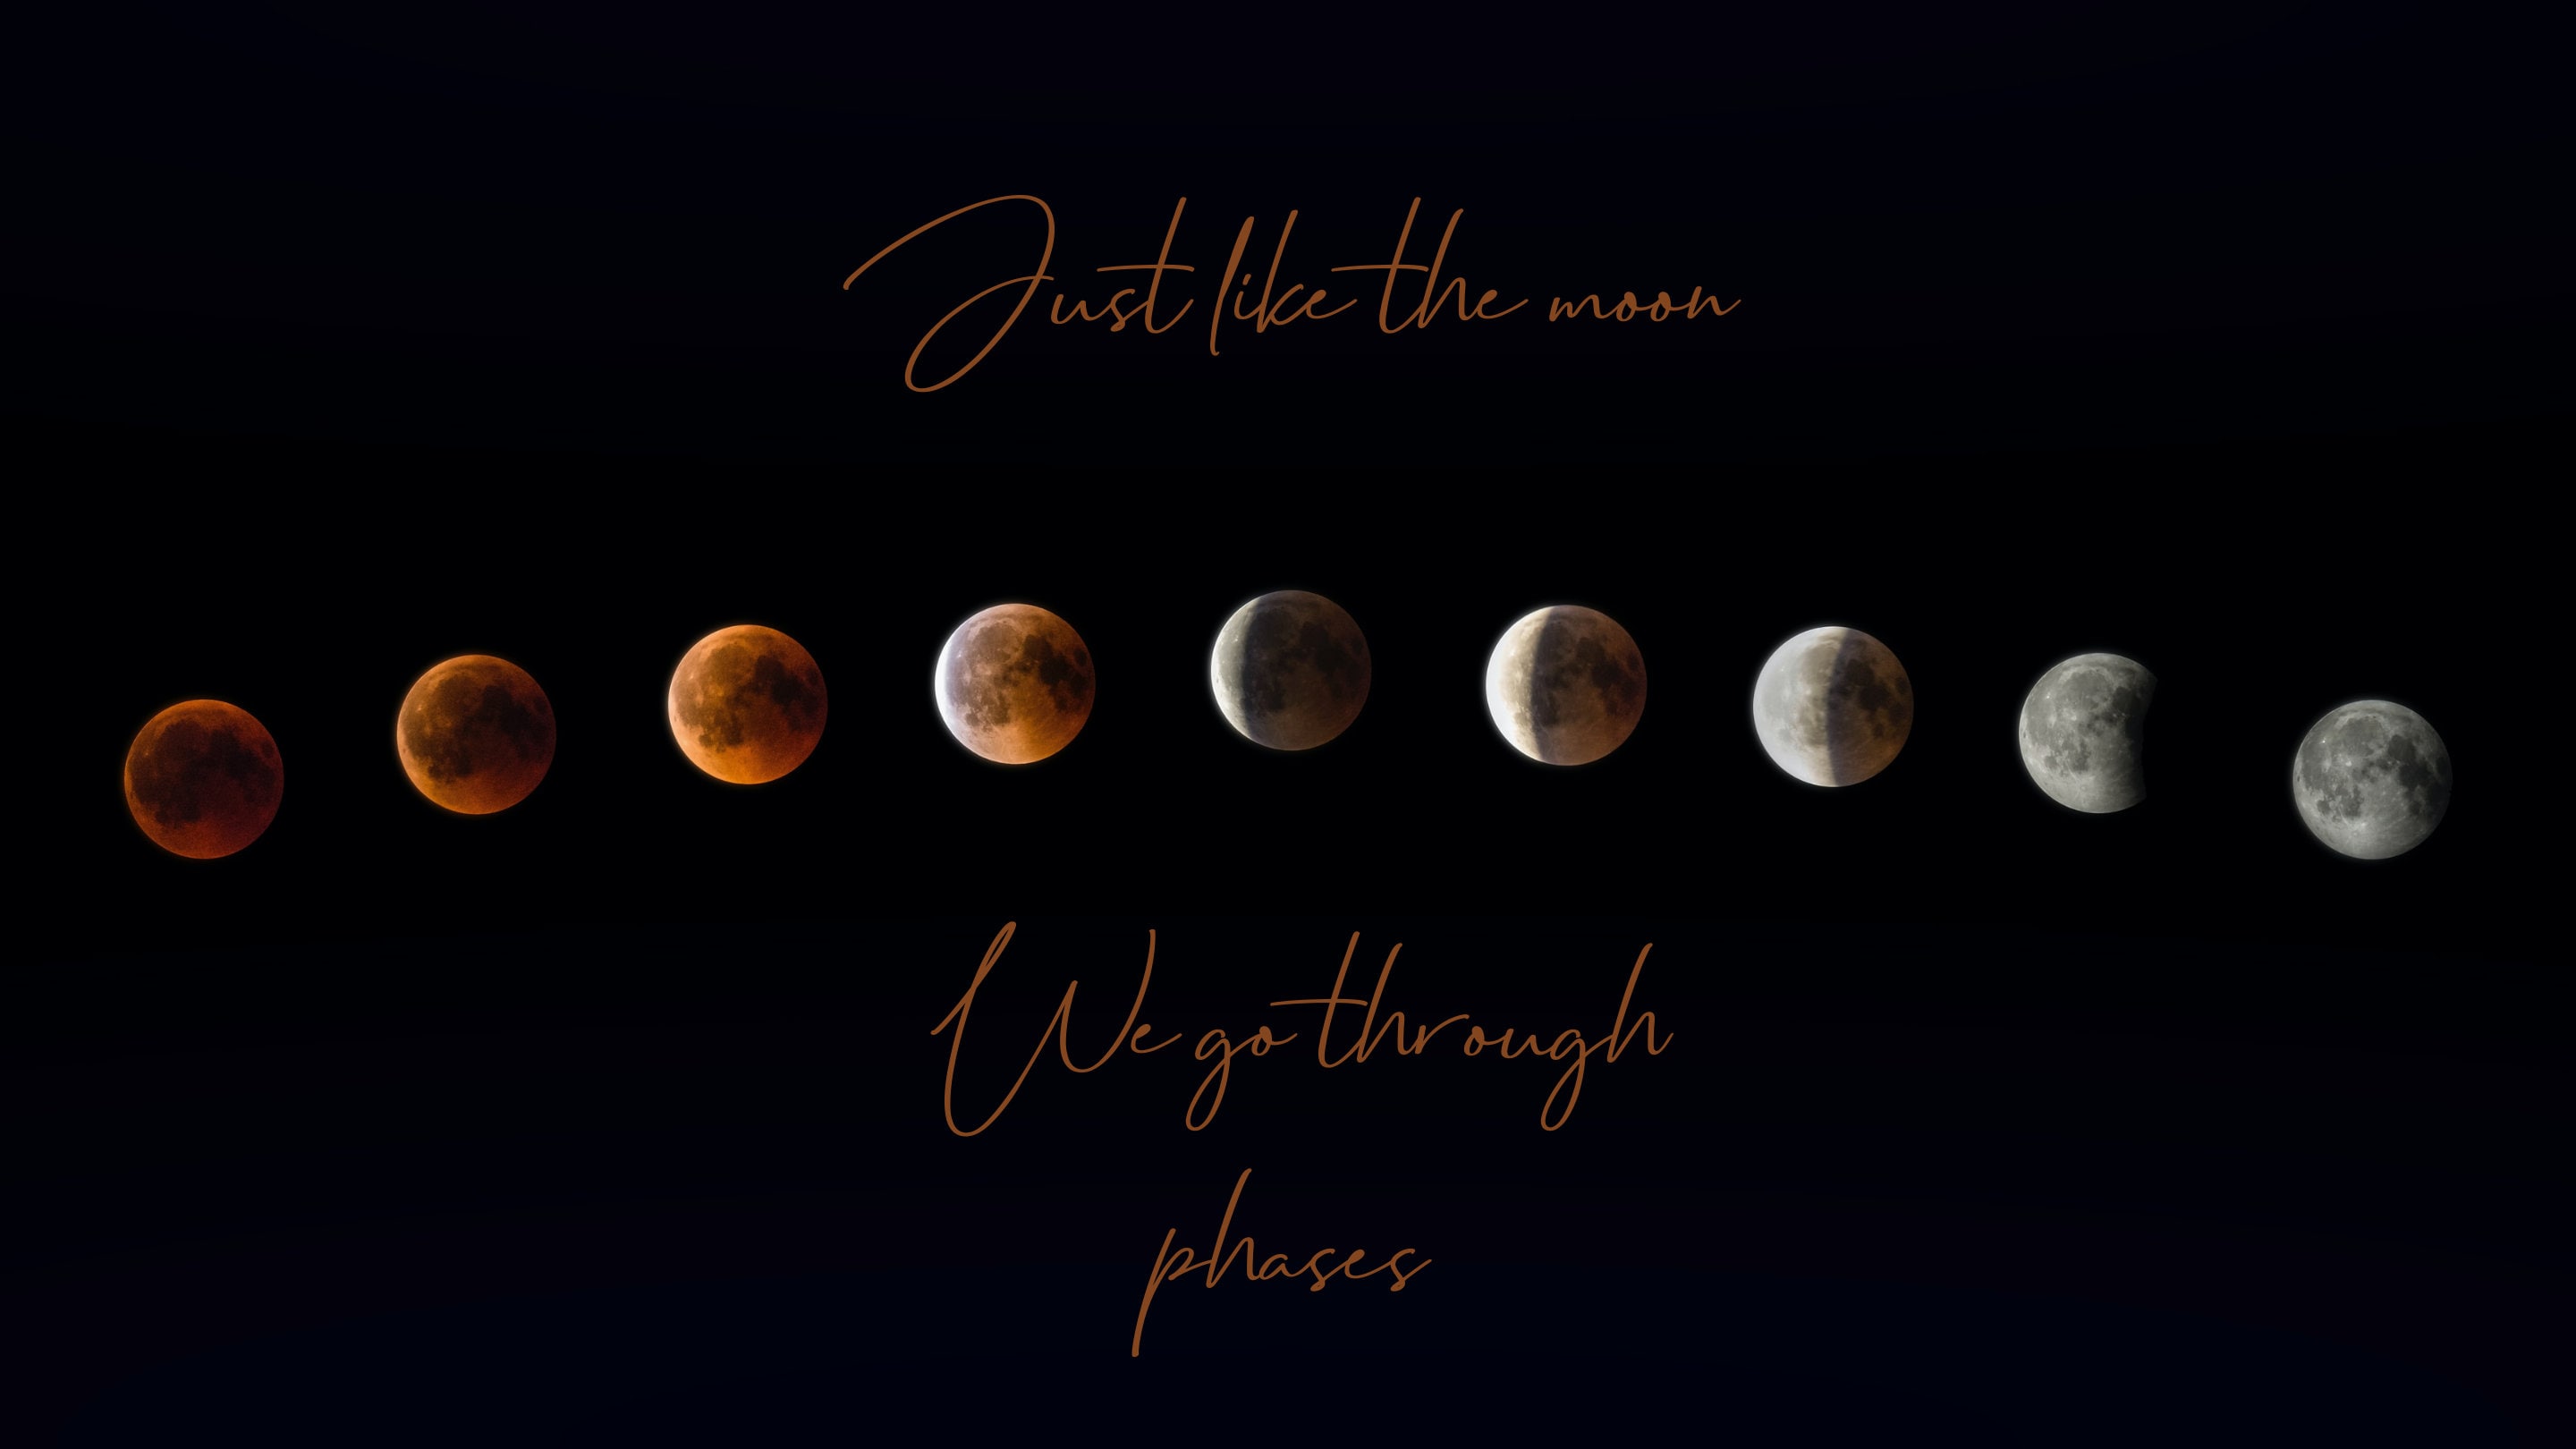 Just like the moon, we go through phases. - Moon phases